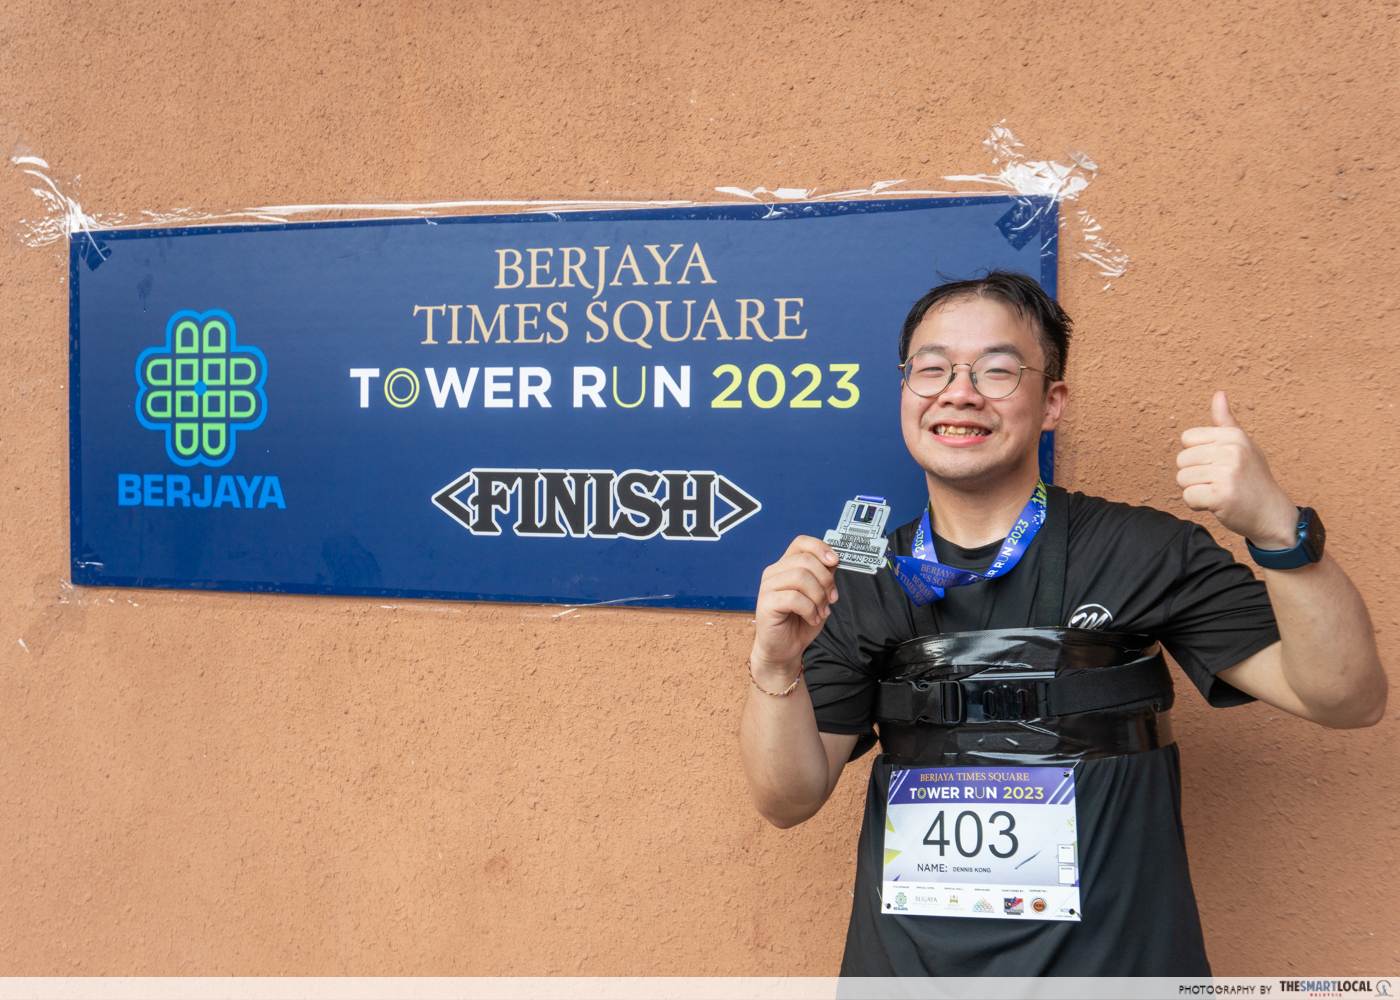 Tower run finisher - me after completing the race